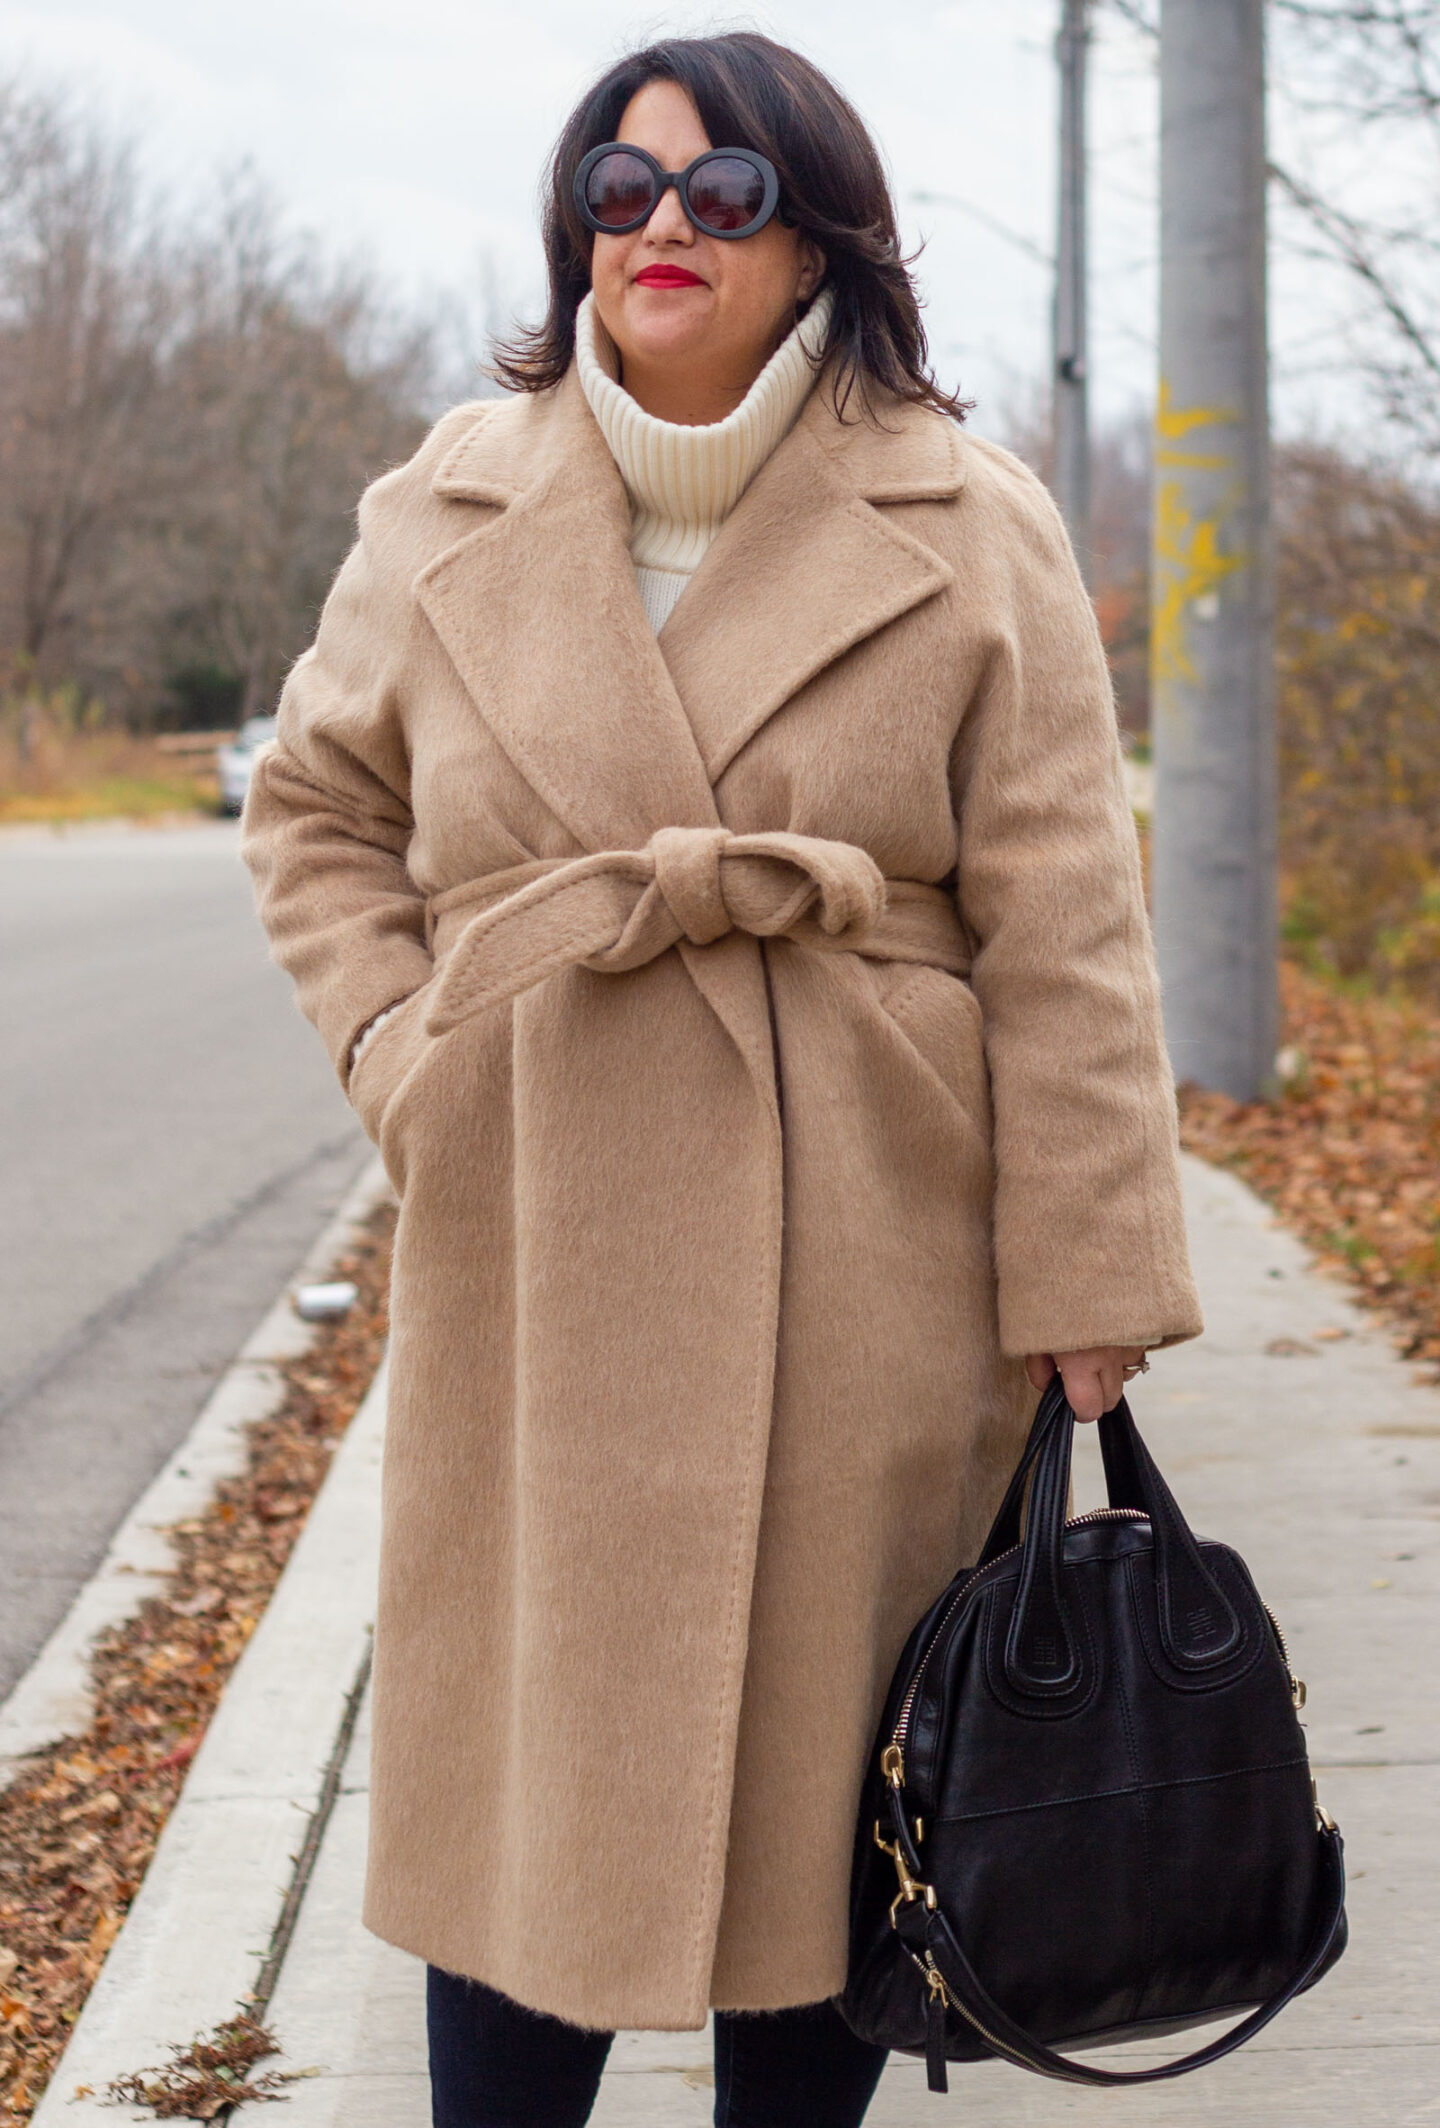 camel wrap coat outfit cream sweater